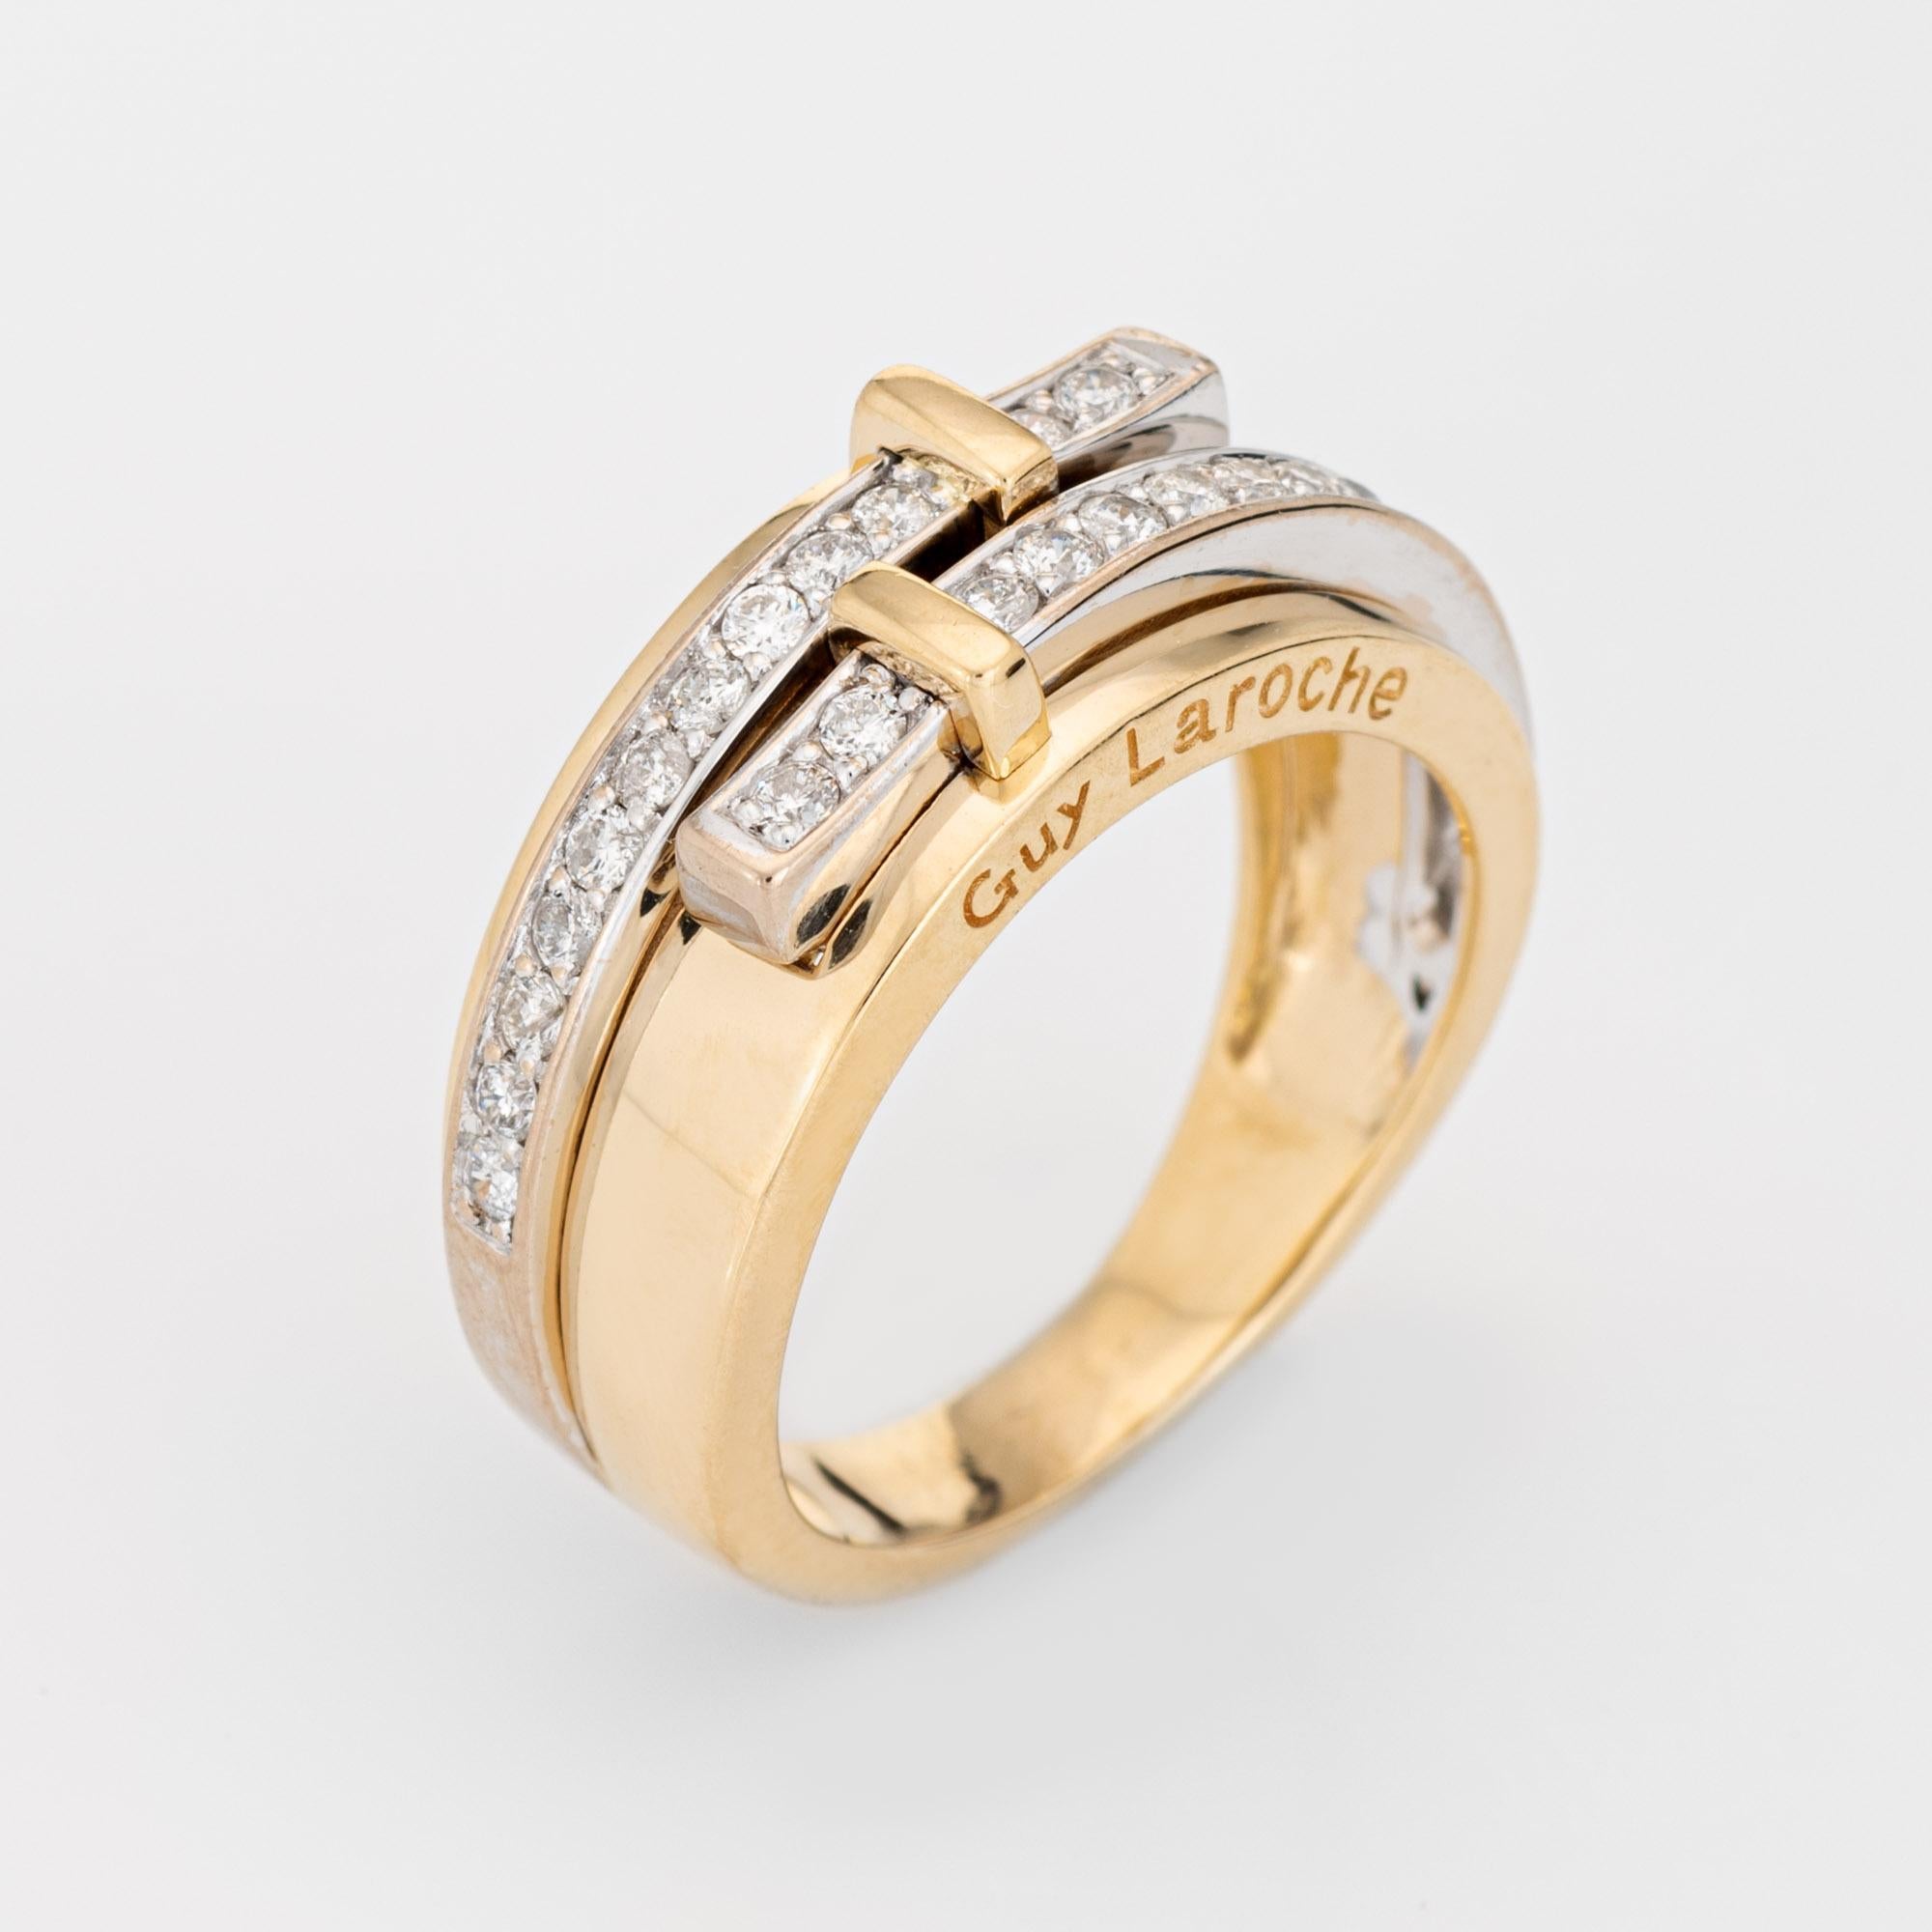 Stylish vintage Guy Laroche diamond band (circa 1990s) crafted in 18 karat two-tone yellow & white gold. 

Round brilliant cut diamonds total an estimated 0.48 carats (estimated at H-I color and VS2-SI2 clarity). 

Known for haute couture fashion,